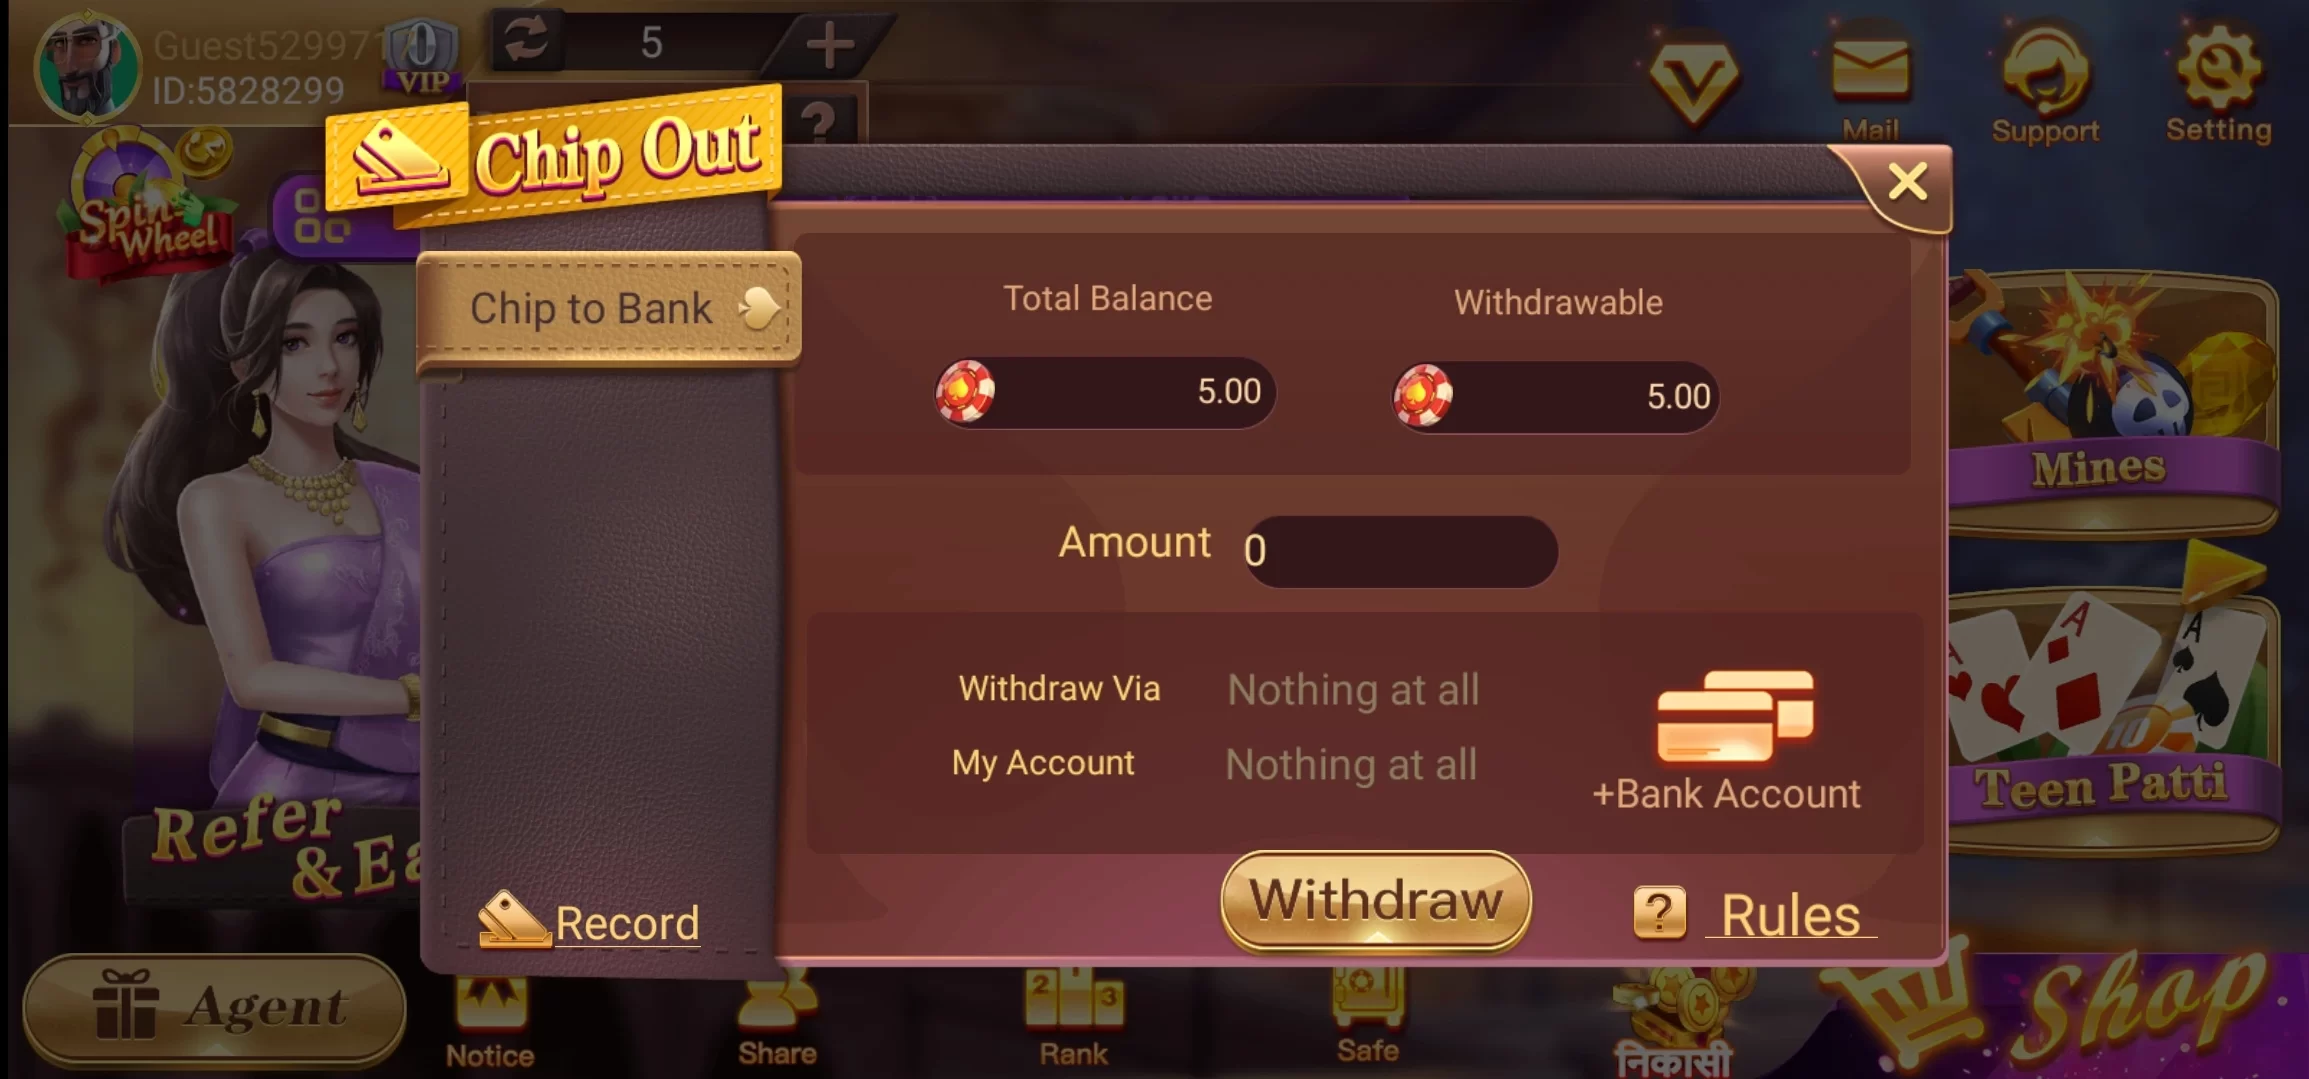 How To Withdraw Money From Teen Patti Royal App